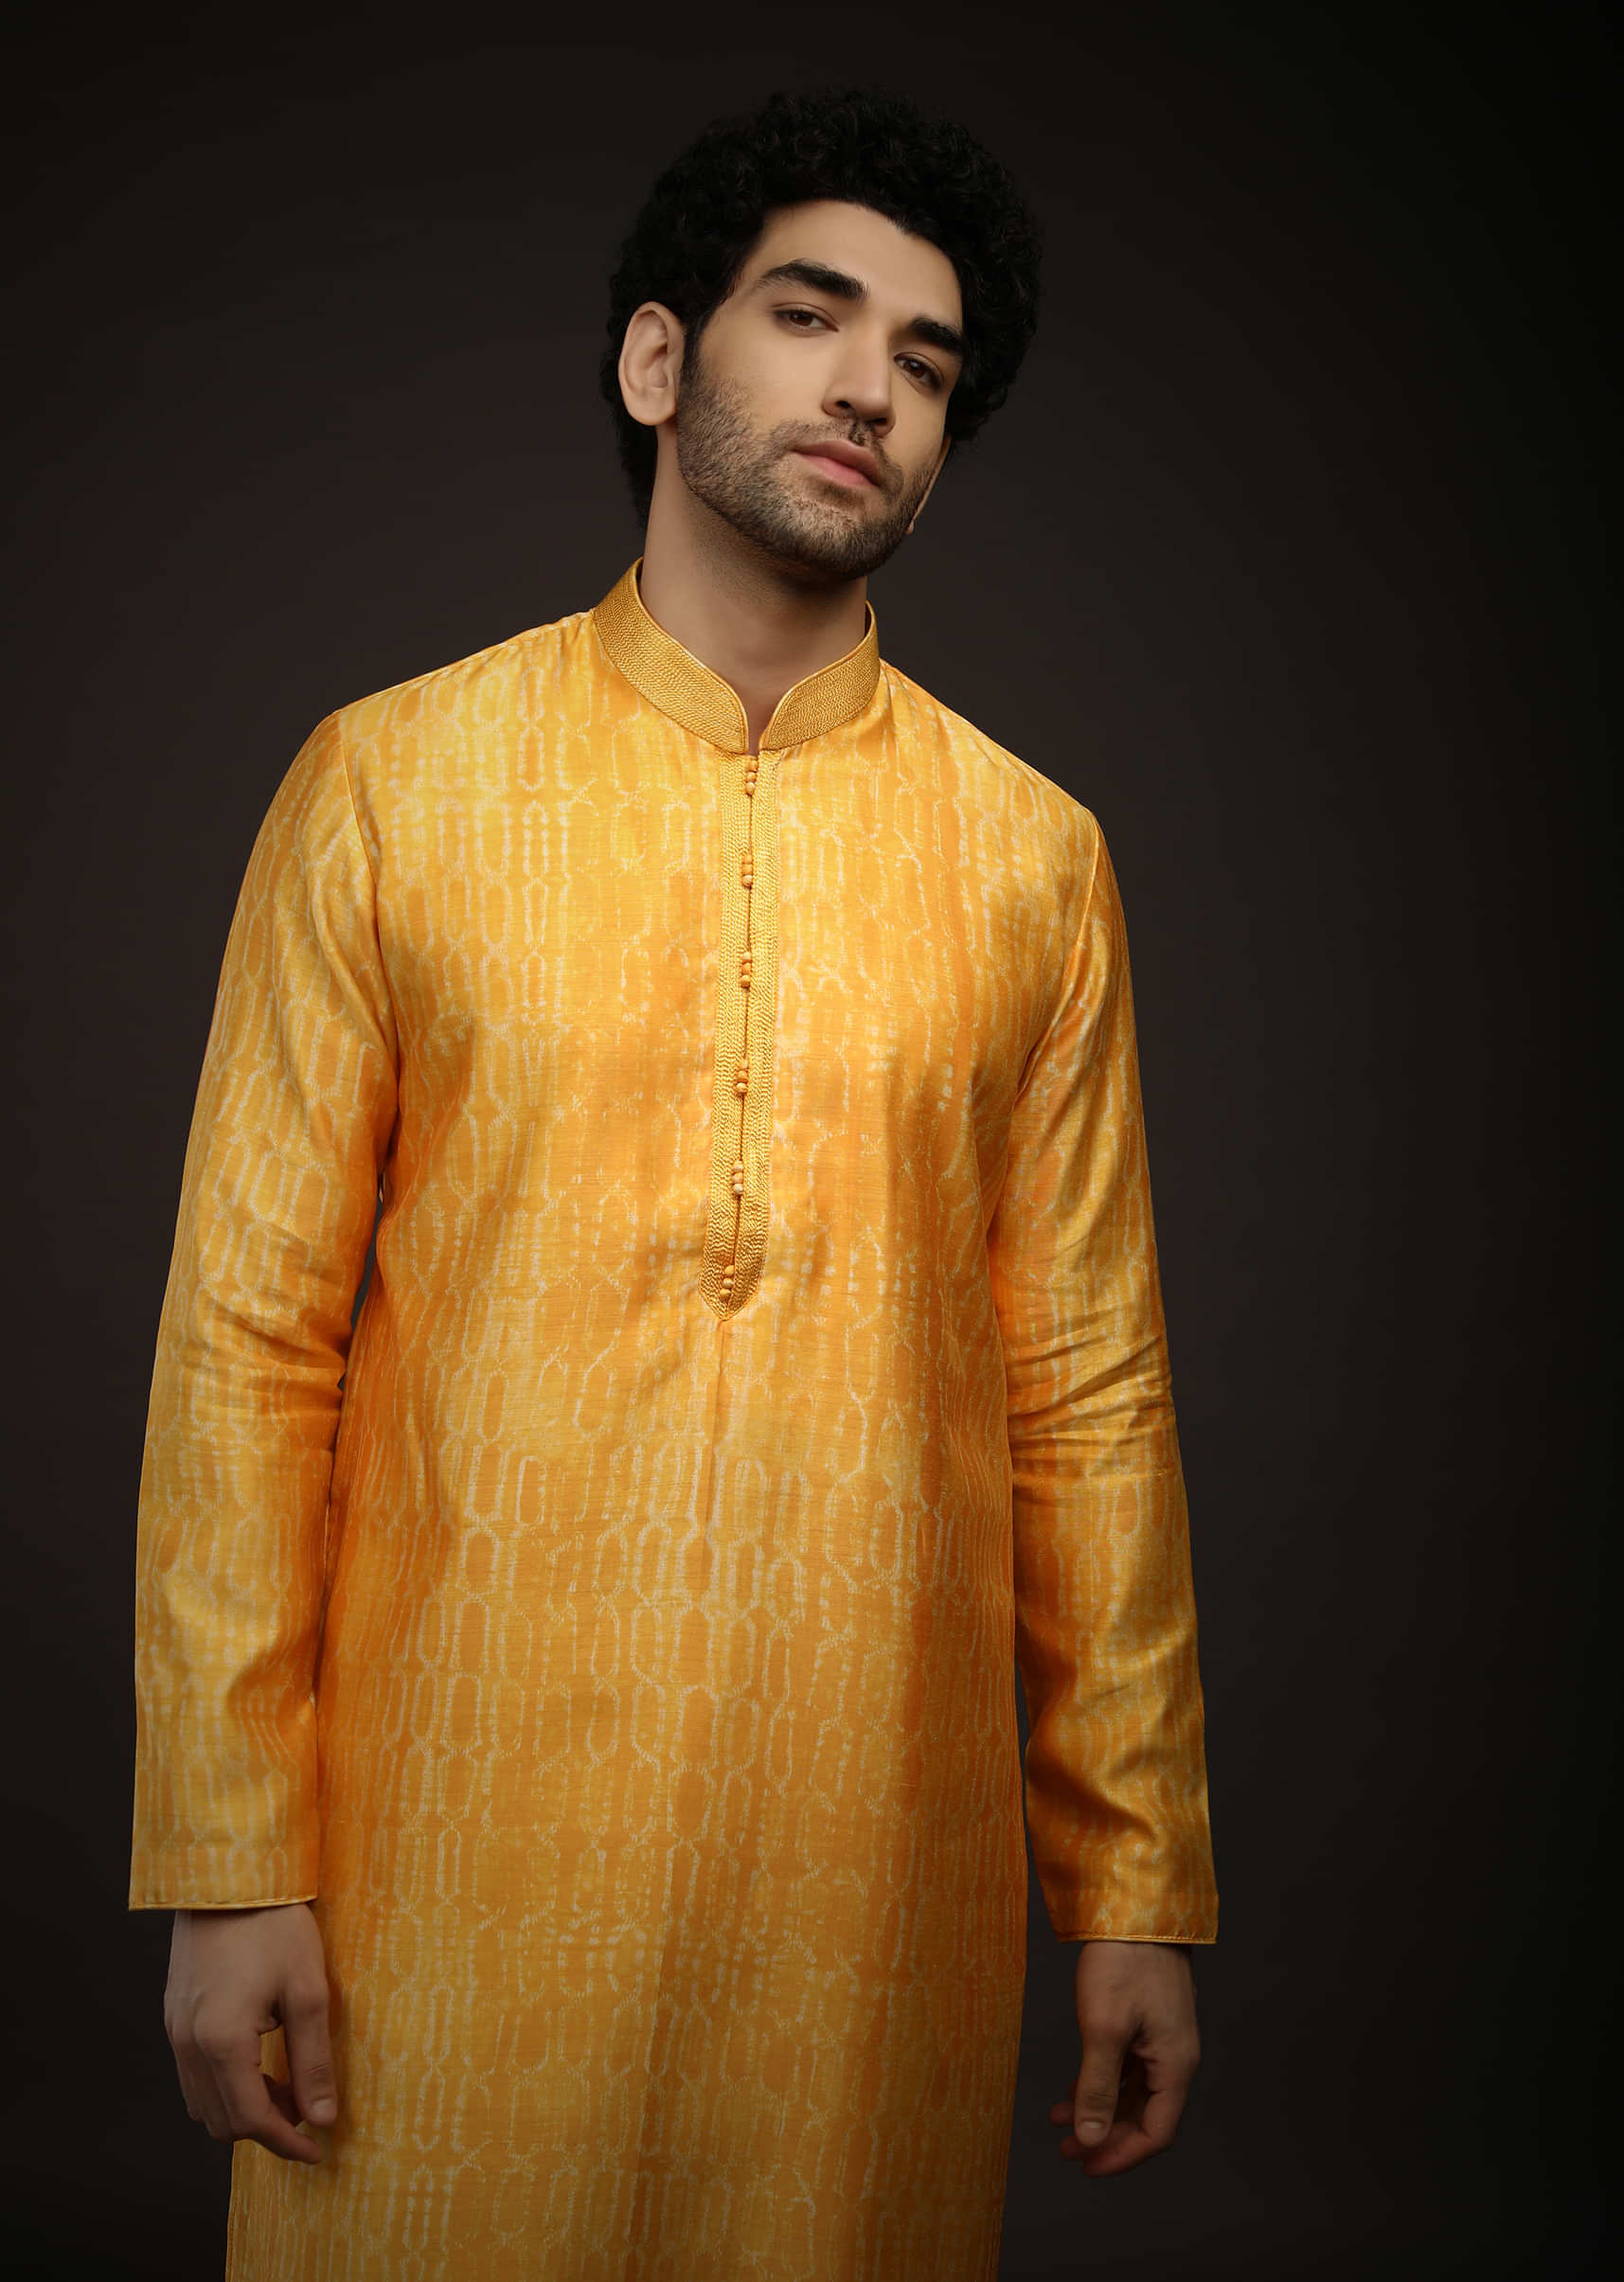 Saffron Yellow Kurta Set In Raw Silk With Tie Dye Design All Over And Resham Work On The Placket